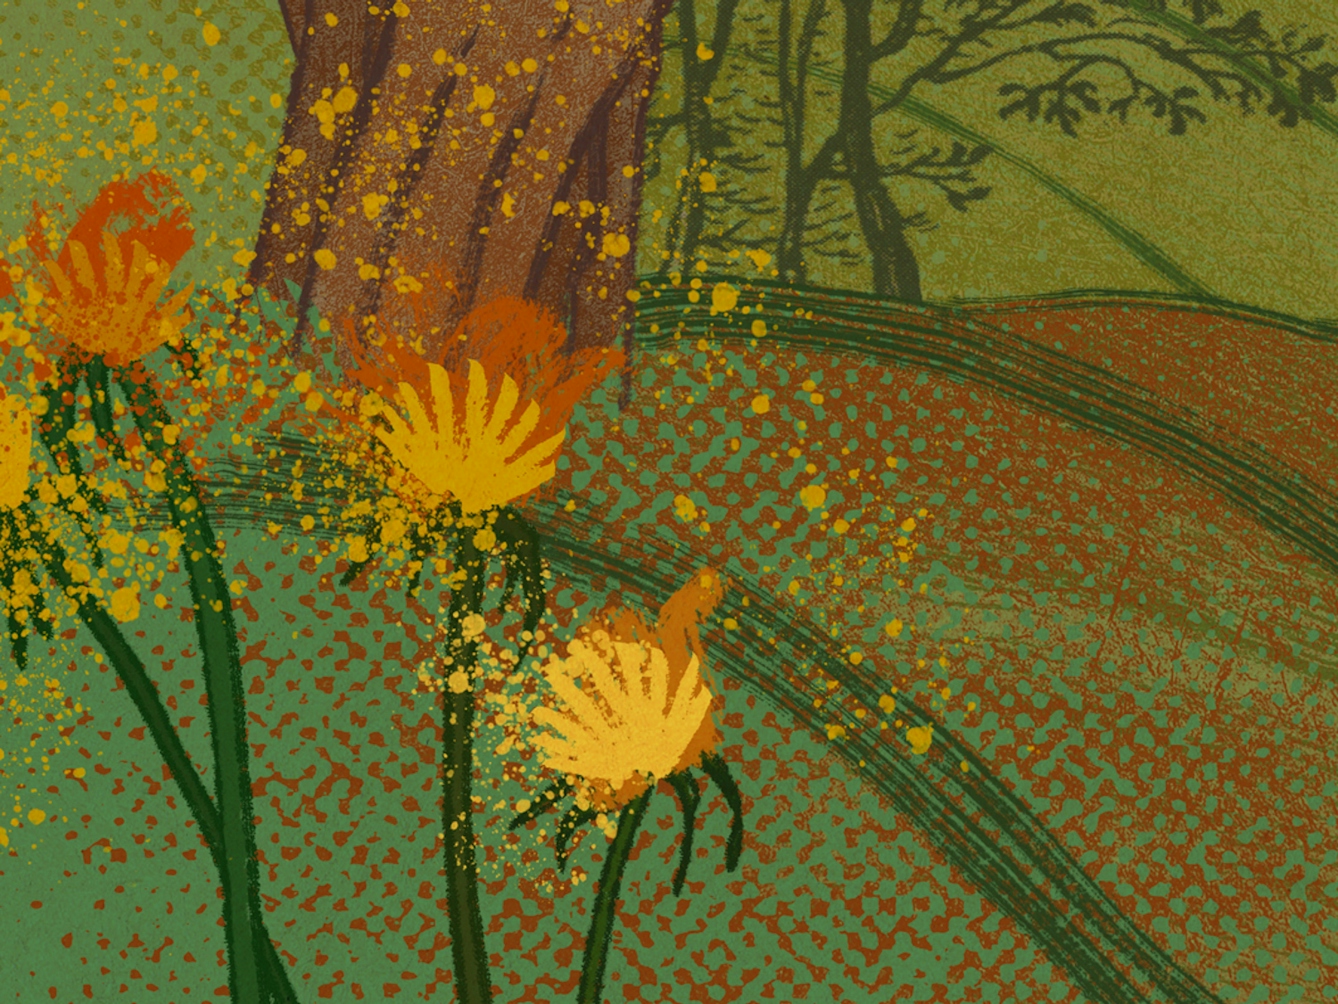 A digital illustration of a dairy farm, in the foreground there are yellow dandelions sprouting from the soil, with their petals floating away in a breeze and in the background we see rolling hills with trees.